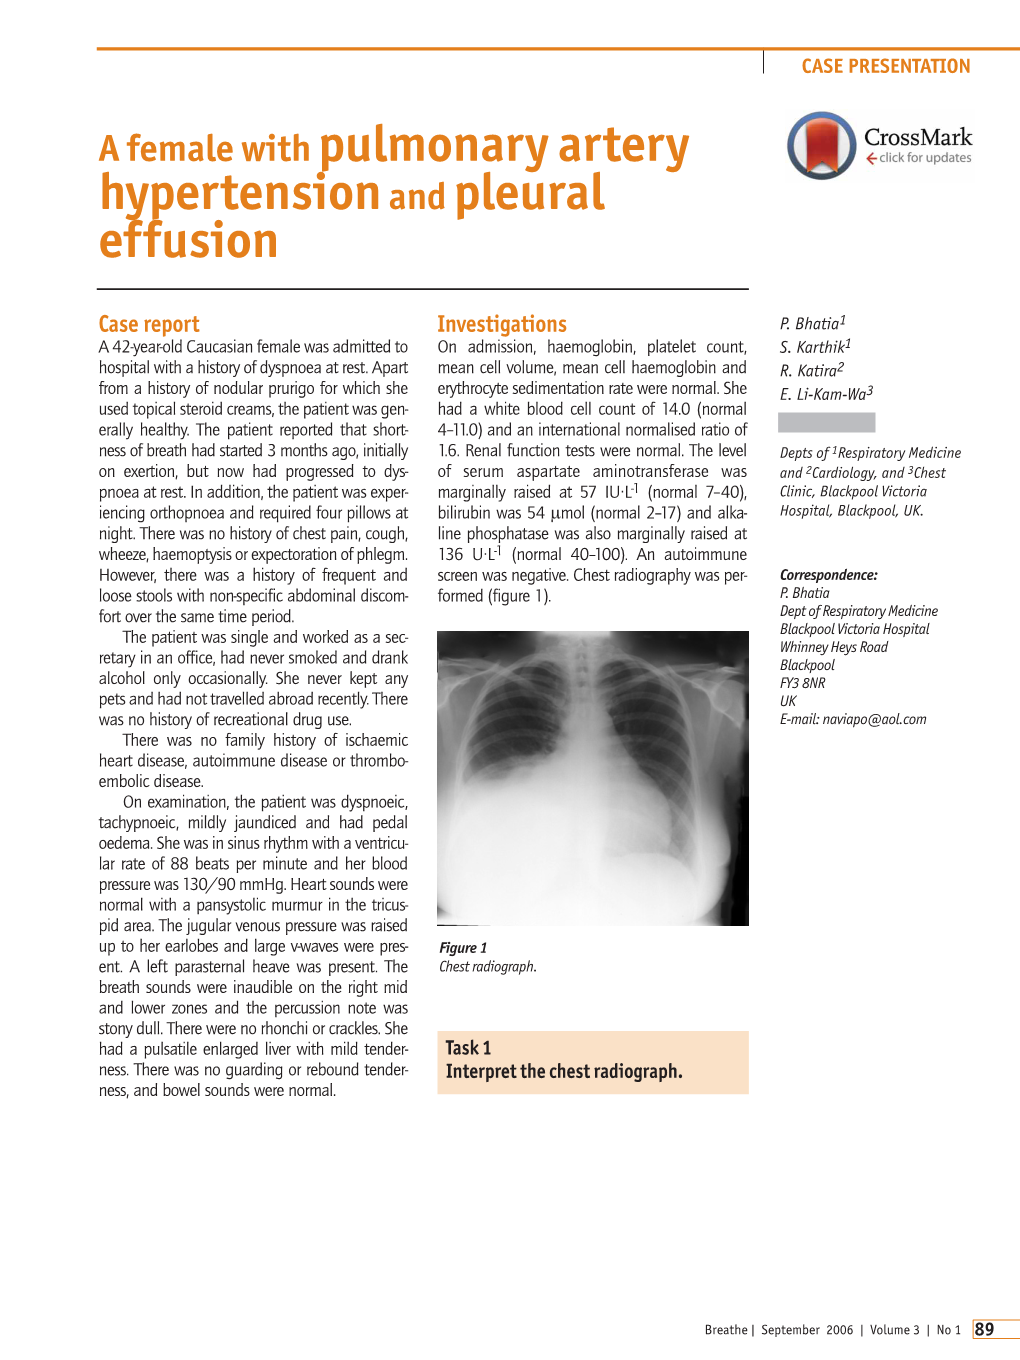 A Female with Pulmonary Artery Hypertension and Pleural Effusion